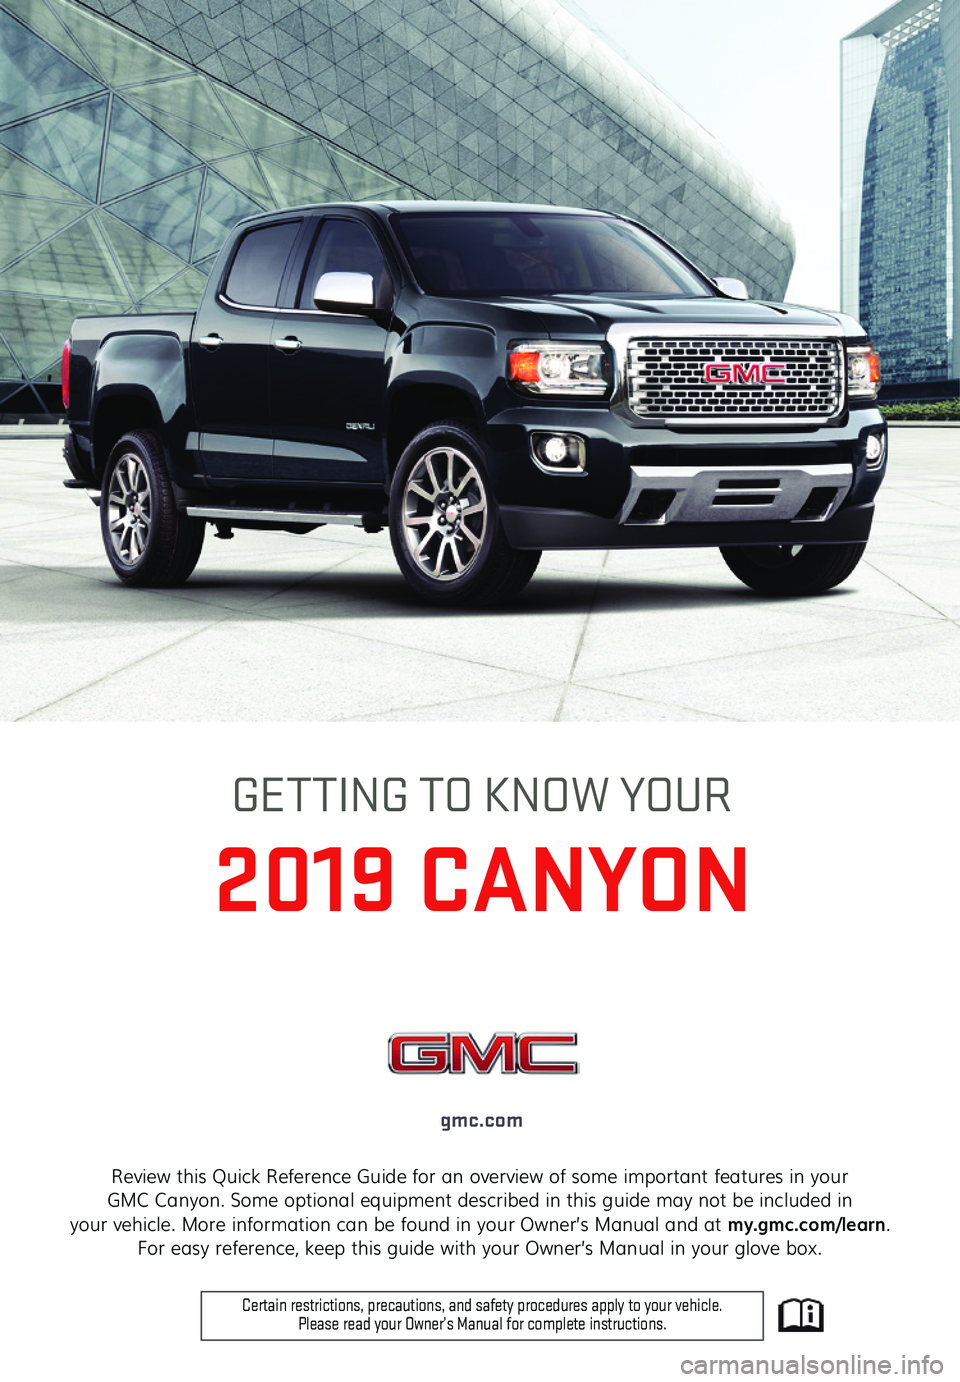 GMC CANYON 2019  Get To Know Guide 1
Review this Quick Reference Guide for an overview of some important features in your  GMC Canyon. Some optional equipment described in this guide may not be included in  your vehicle. More informati